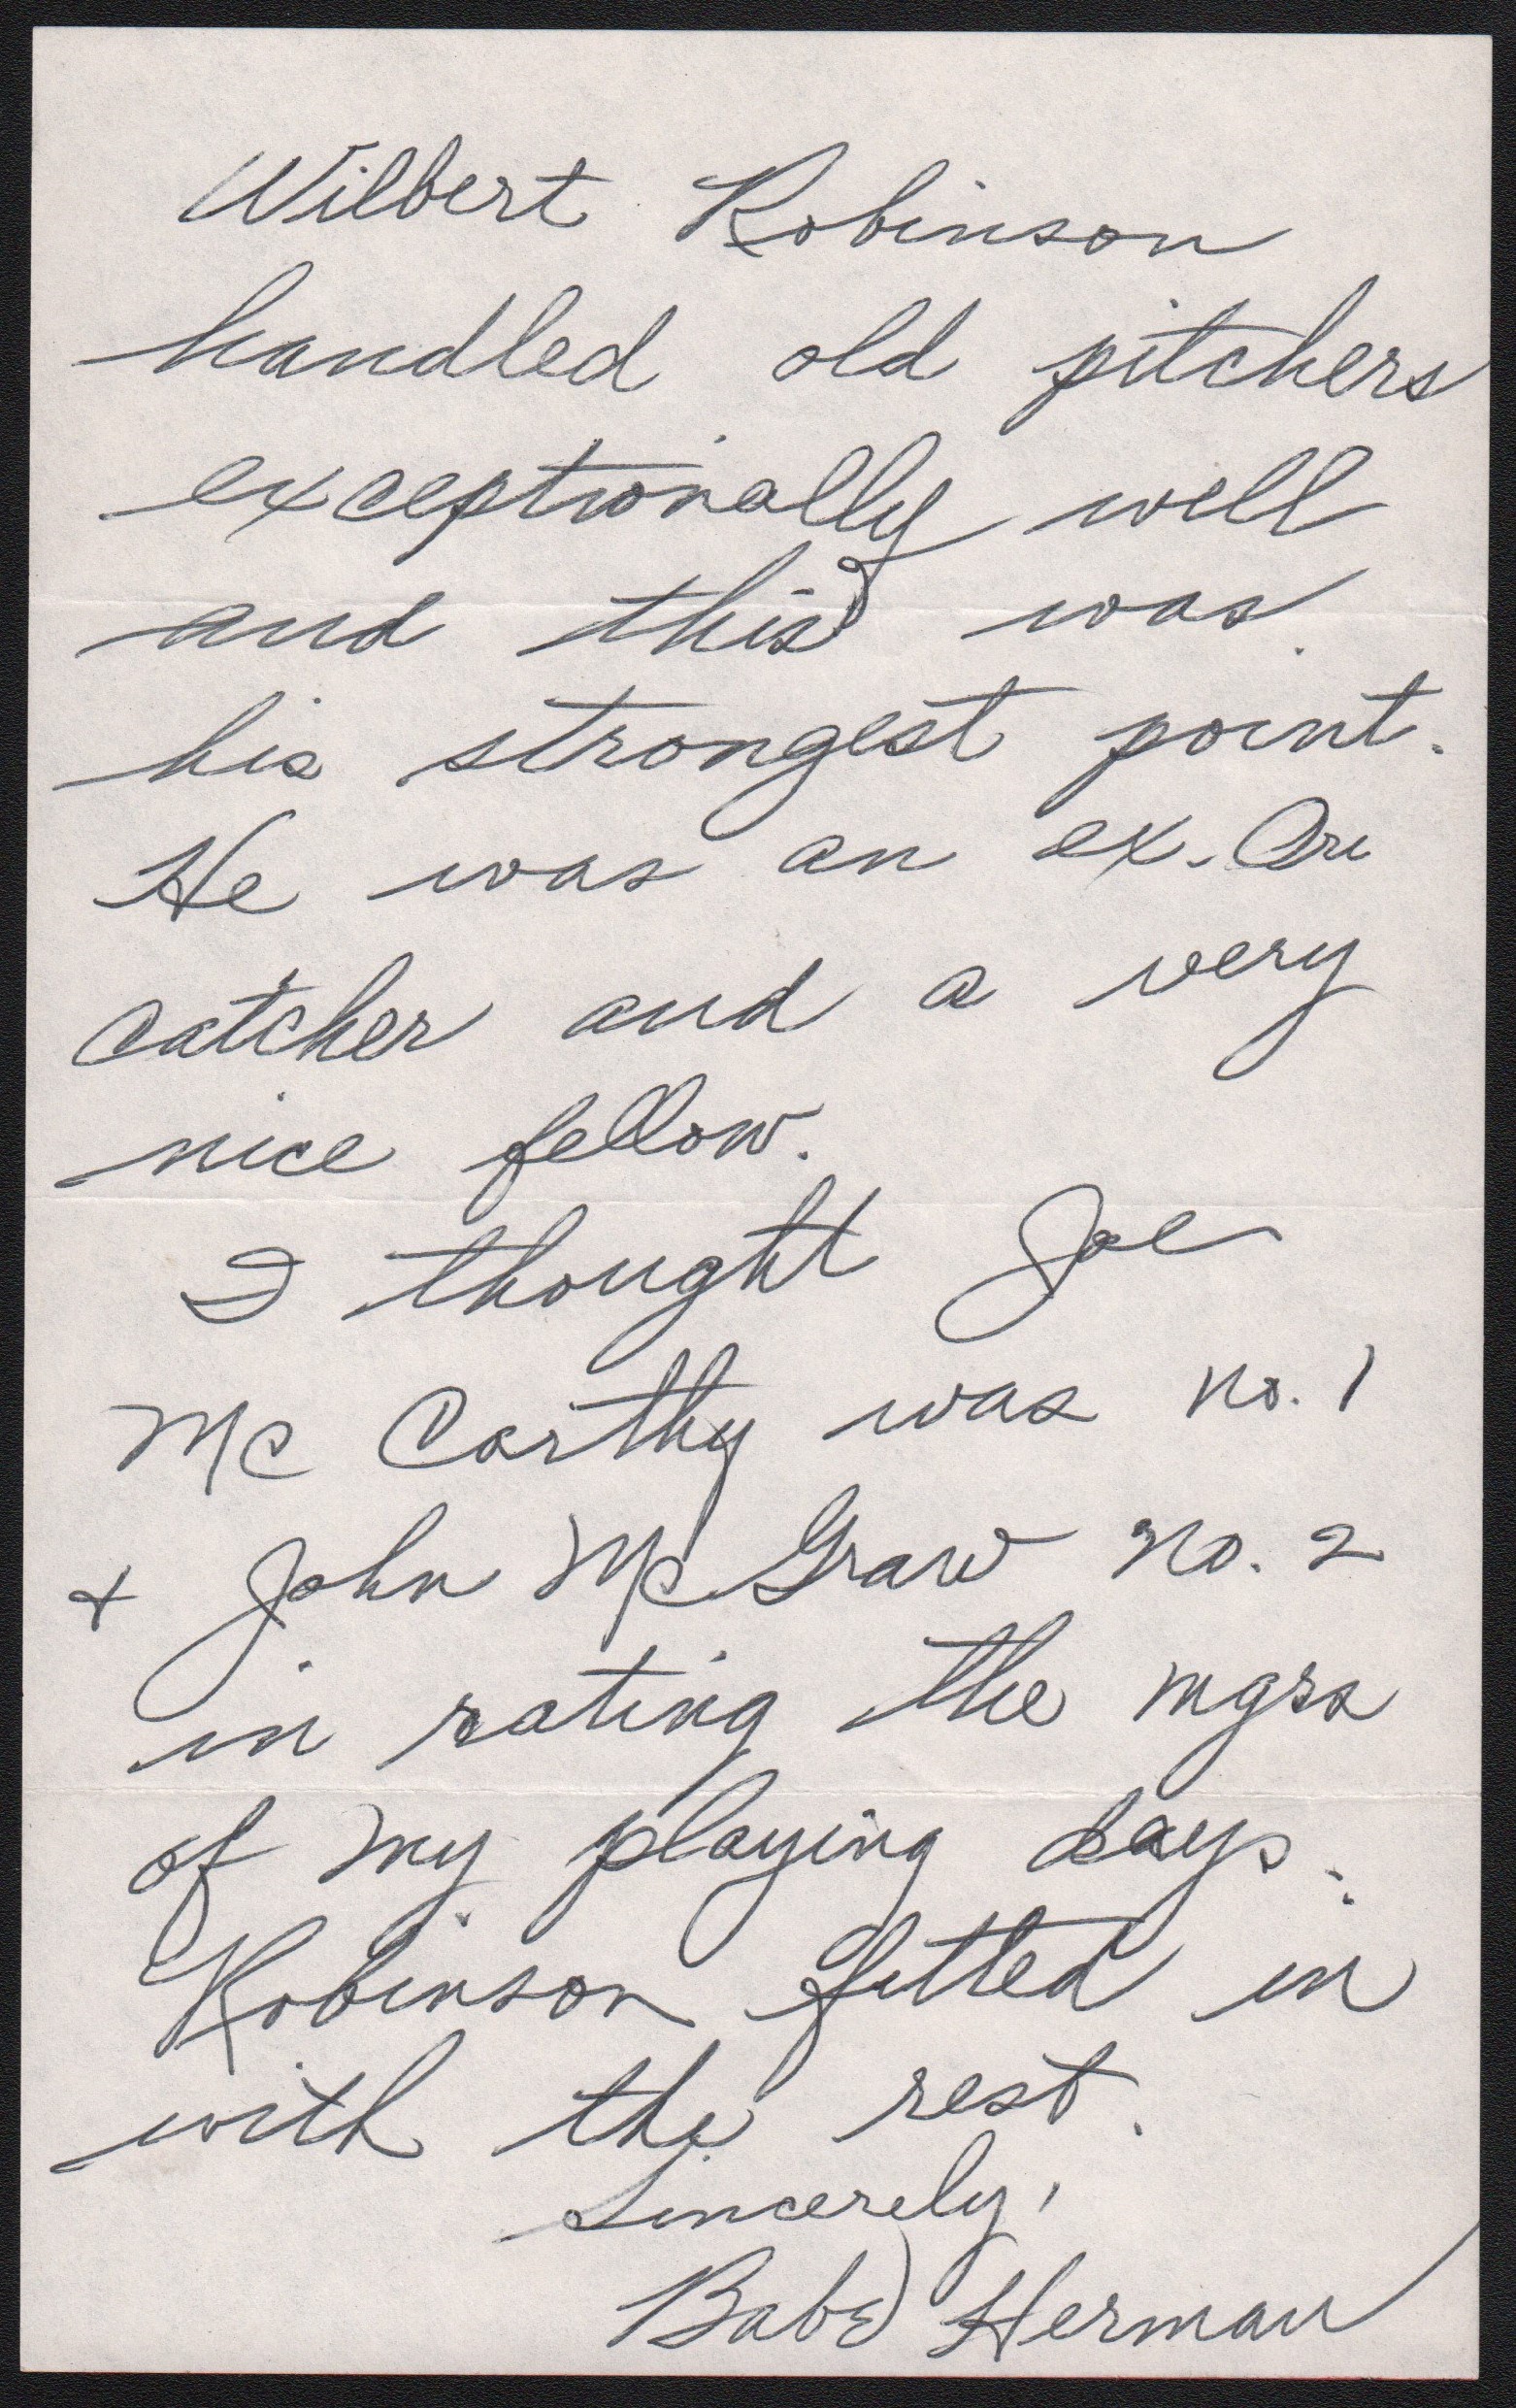 - Babe Herman 1-Page Handwritten Letter w/McCarthy & McGraw Content